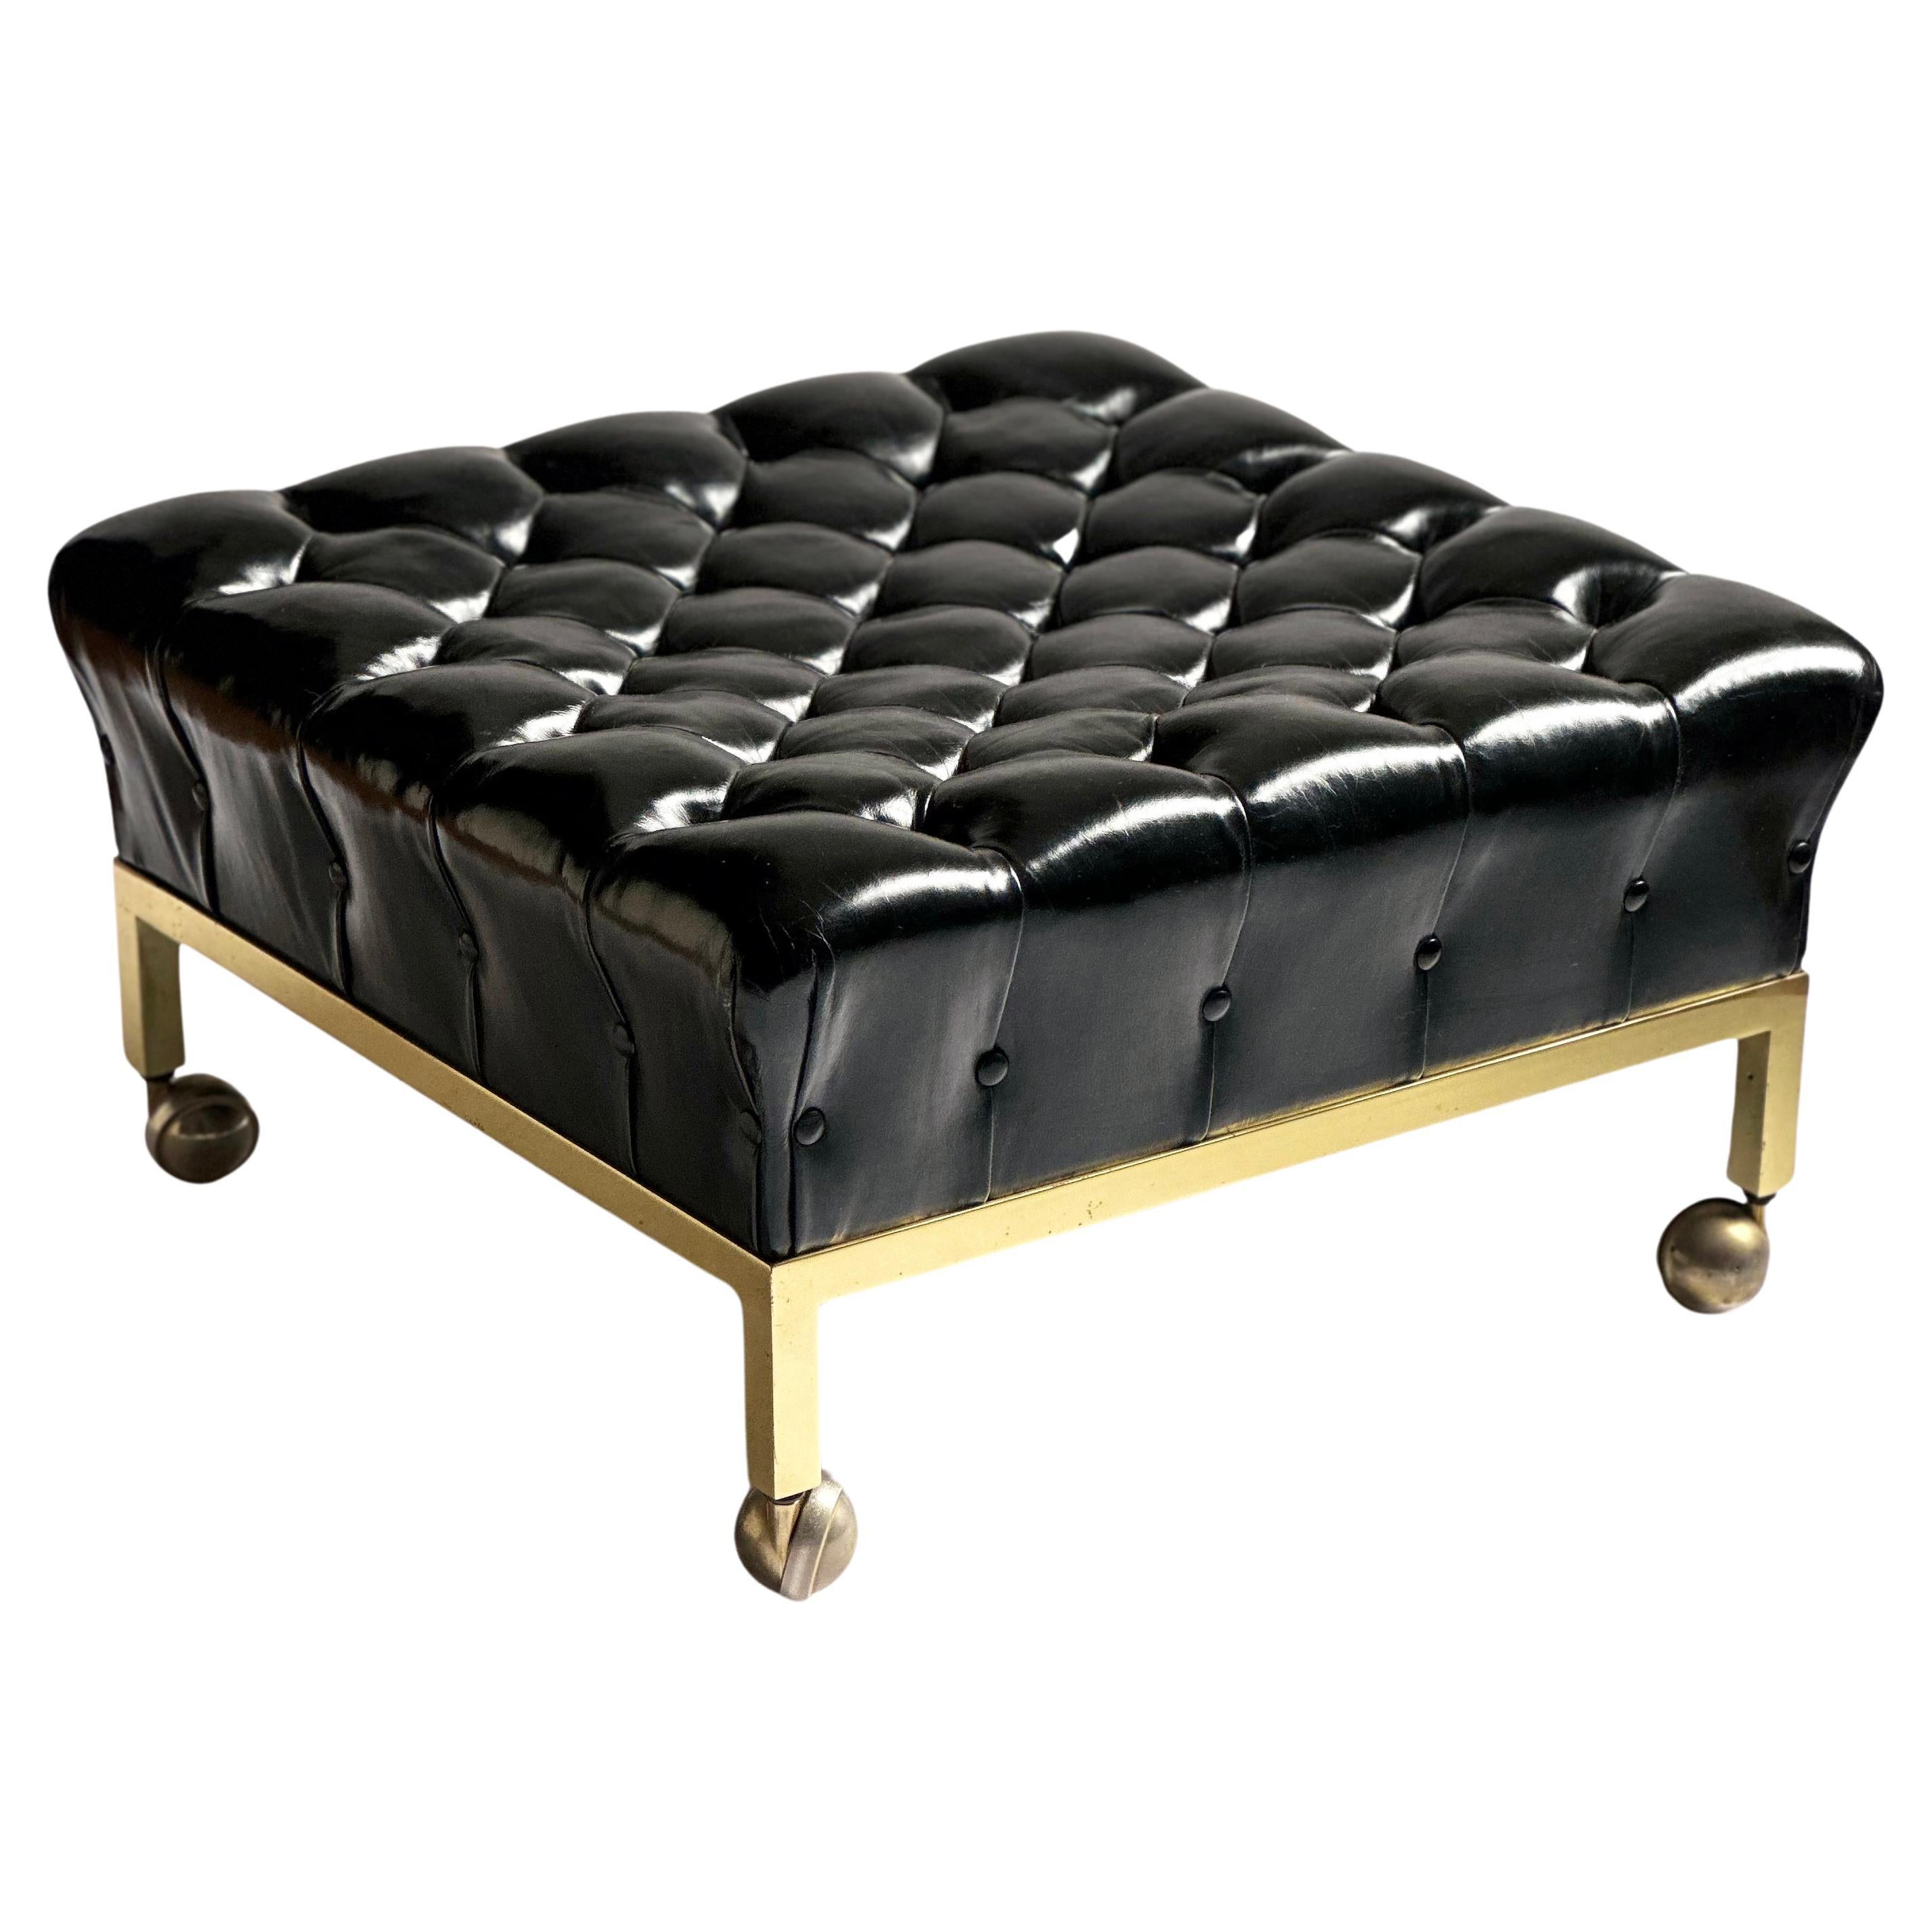 Brass Framed Biscuit Tufted Ottoman in Original Black Leather by Harvey Probber For Sale